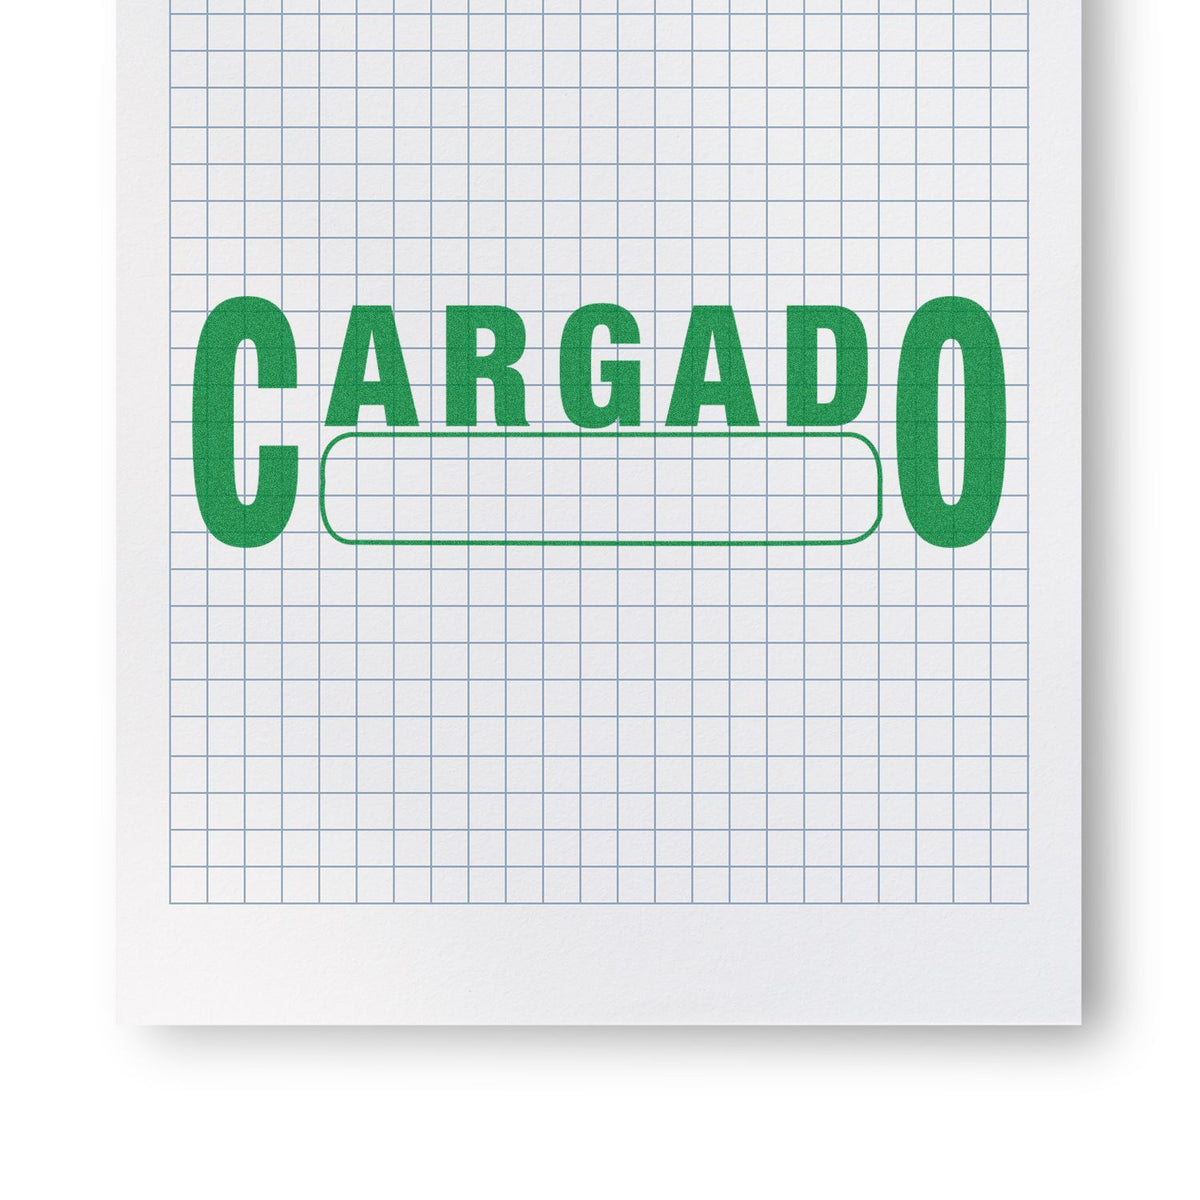 Large Cargado Rubber Stamp In Use